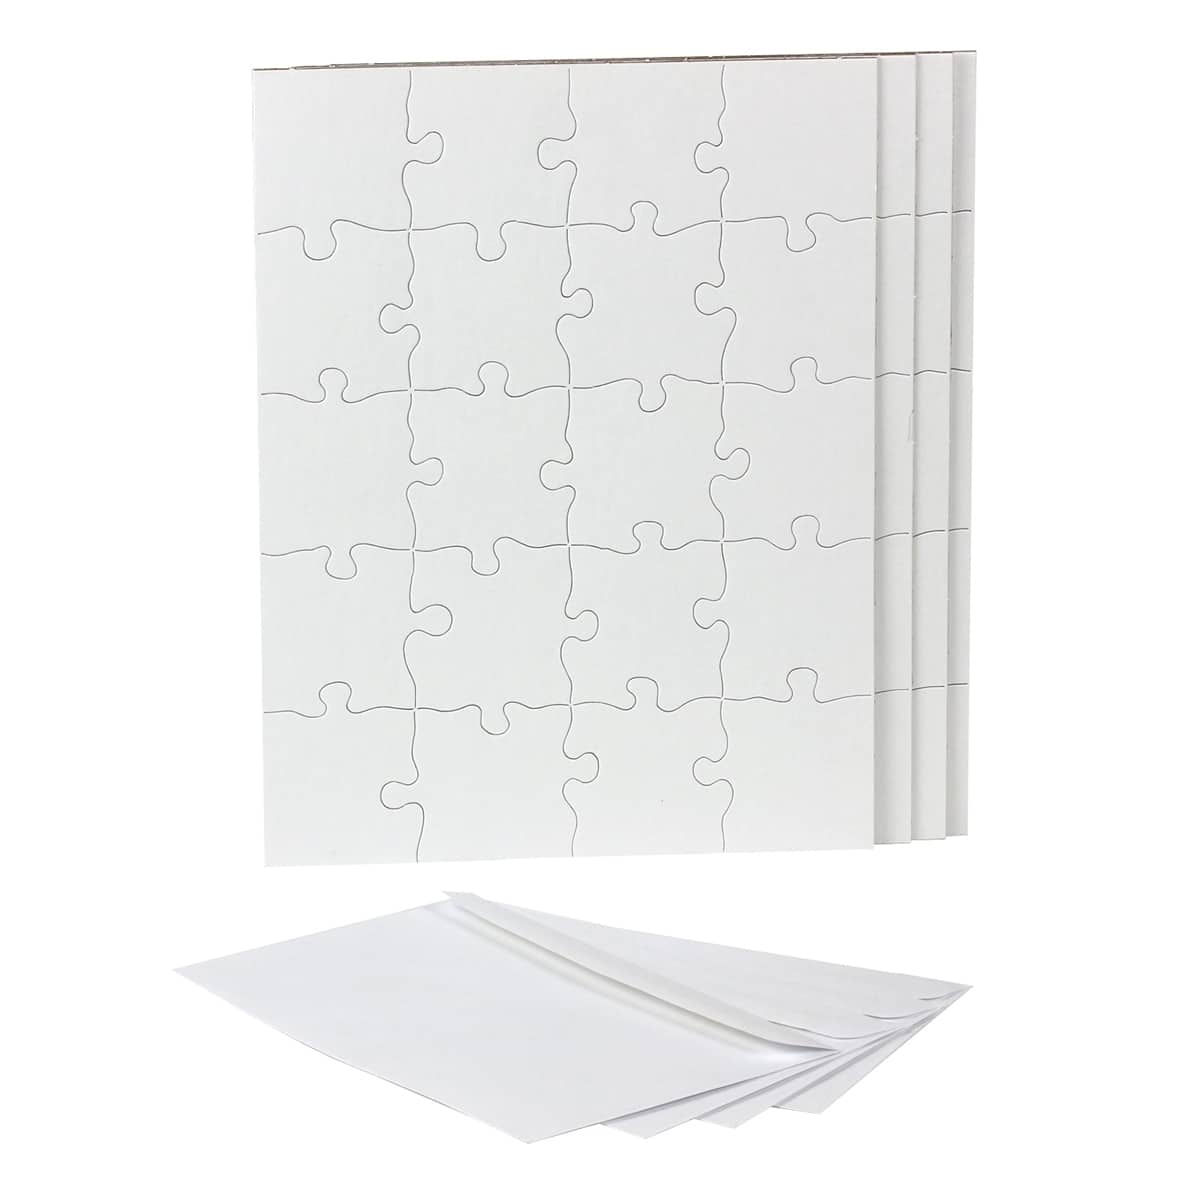 8.5x 11 Blank Puzzles with Envelopes - 63 Piece